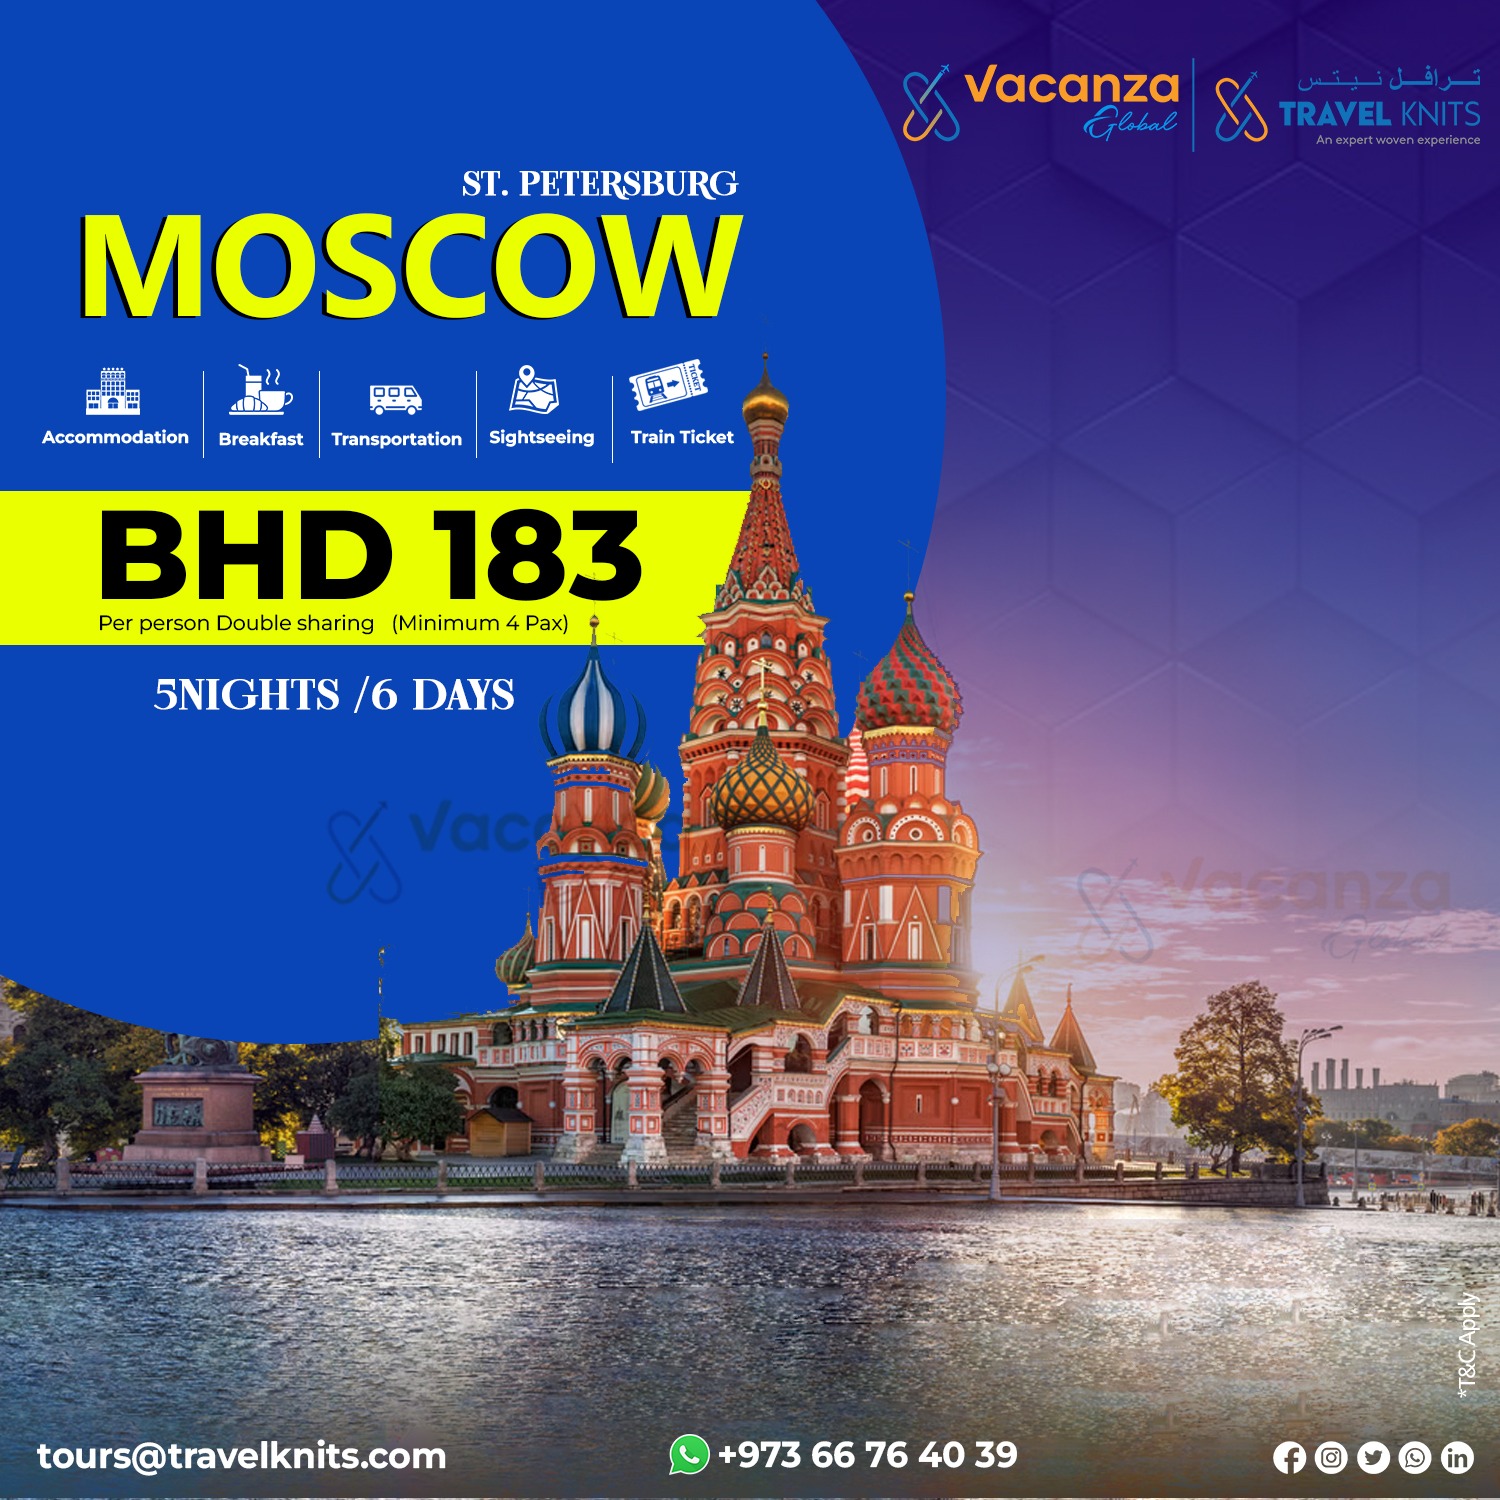 Moscow and St. Petersburg|Best Budget international honeymoon tour packages|Book Honeymoon Holiday Tour Packages												